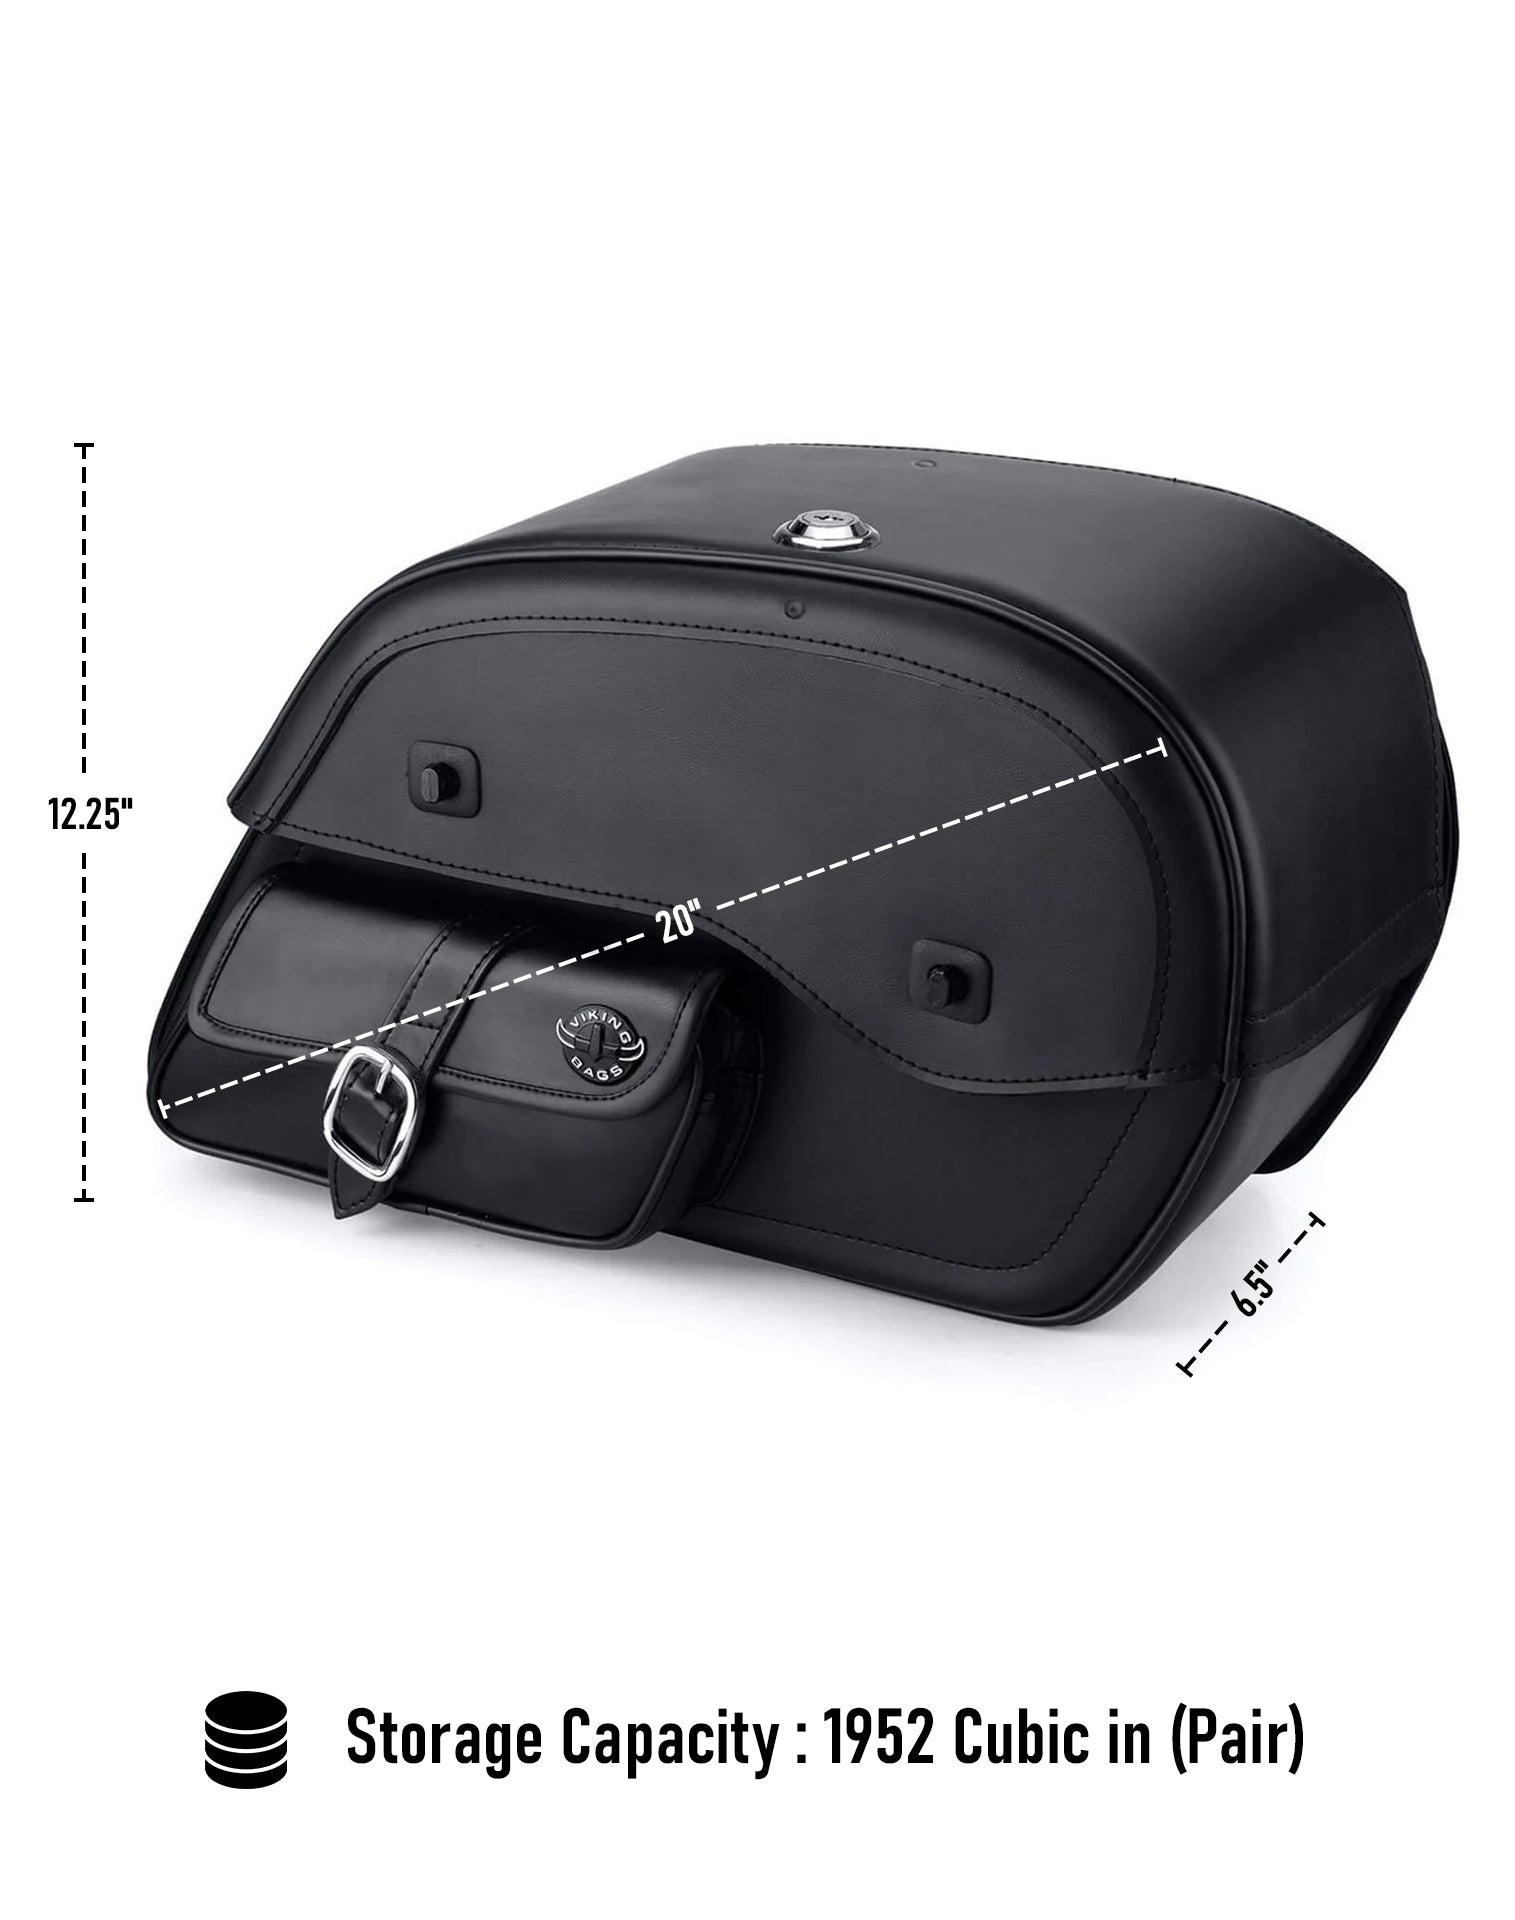 Viking Essential Side Pocket Large Yamaha V Star 1100 Classic Xvs11A Leather Motorcycle Saddlebags Can Store Your Ridings Gears